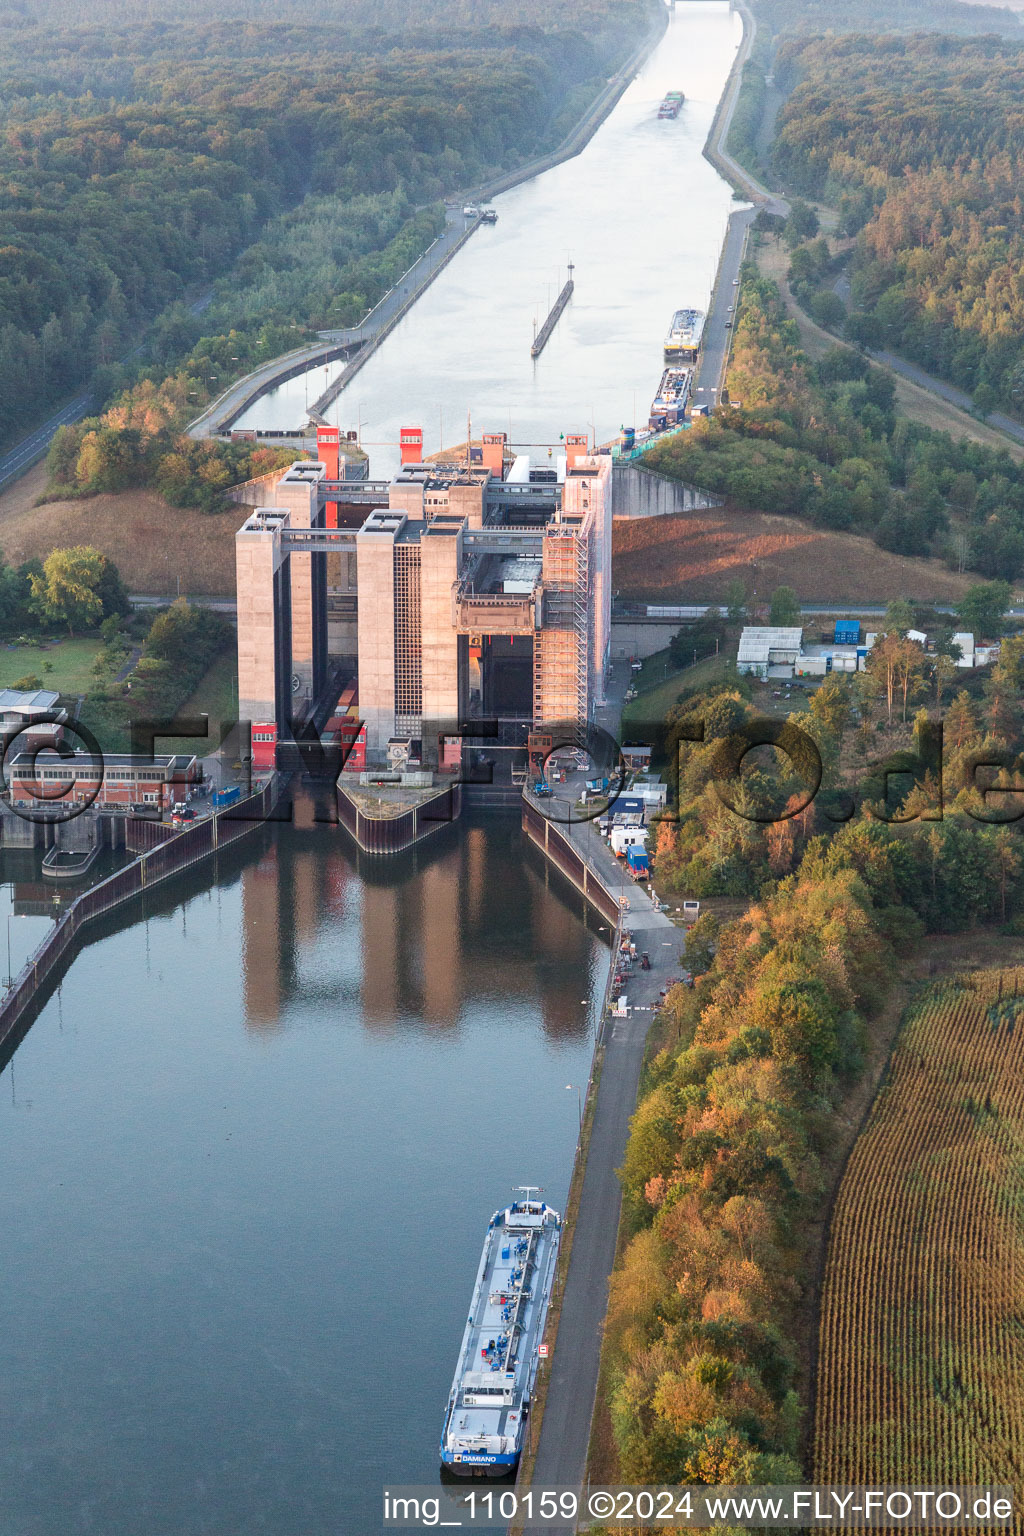 Boat lift and locks plants on the banks of the waterway of the Elbe side channel in Scharnebeck in the state Lower Saxony, Germany from above